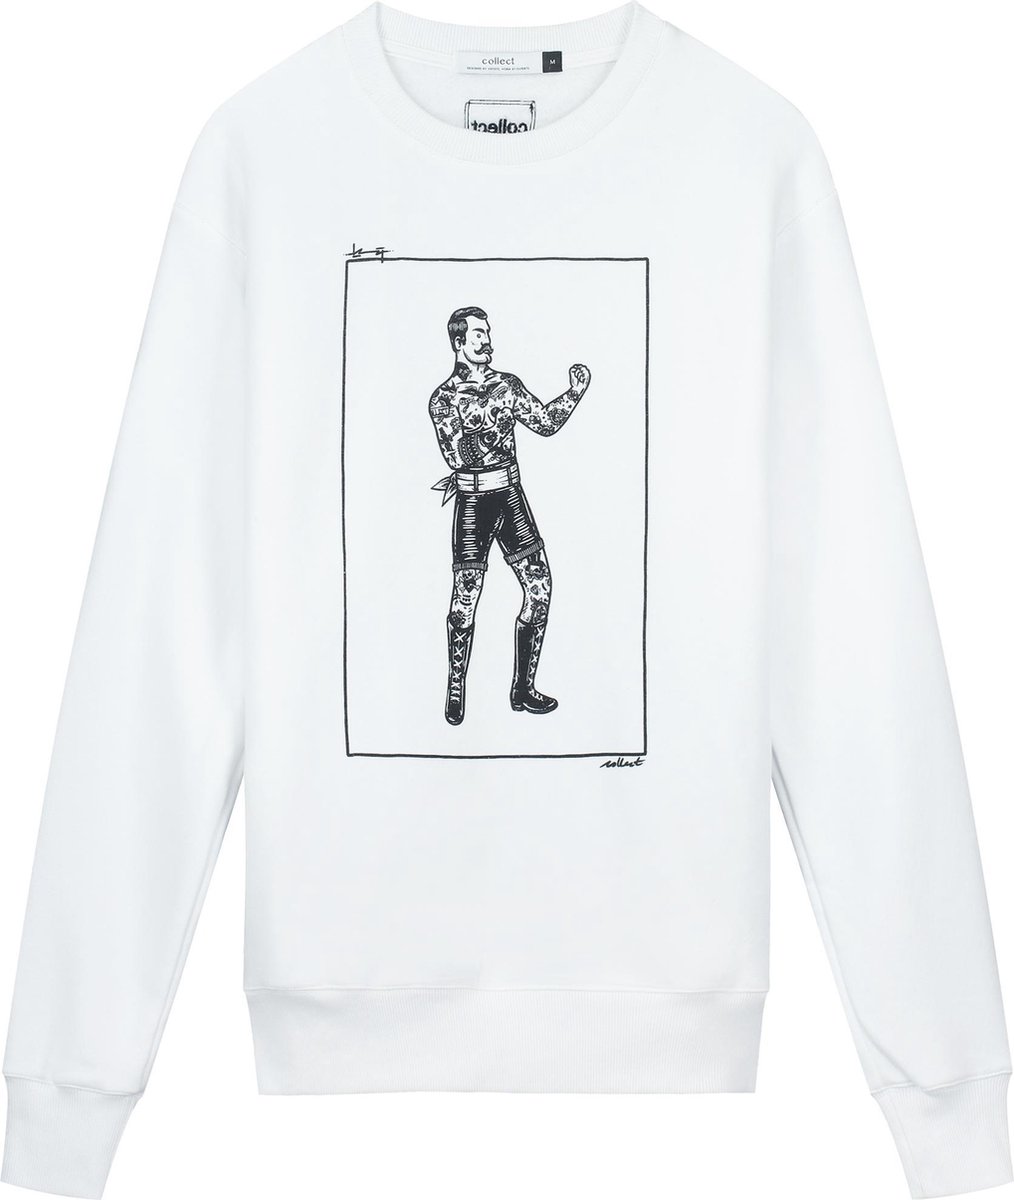 Collect The Label - Hippe Trui - Boxer Tattoo Sweater - Wit - Unisex - S